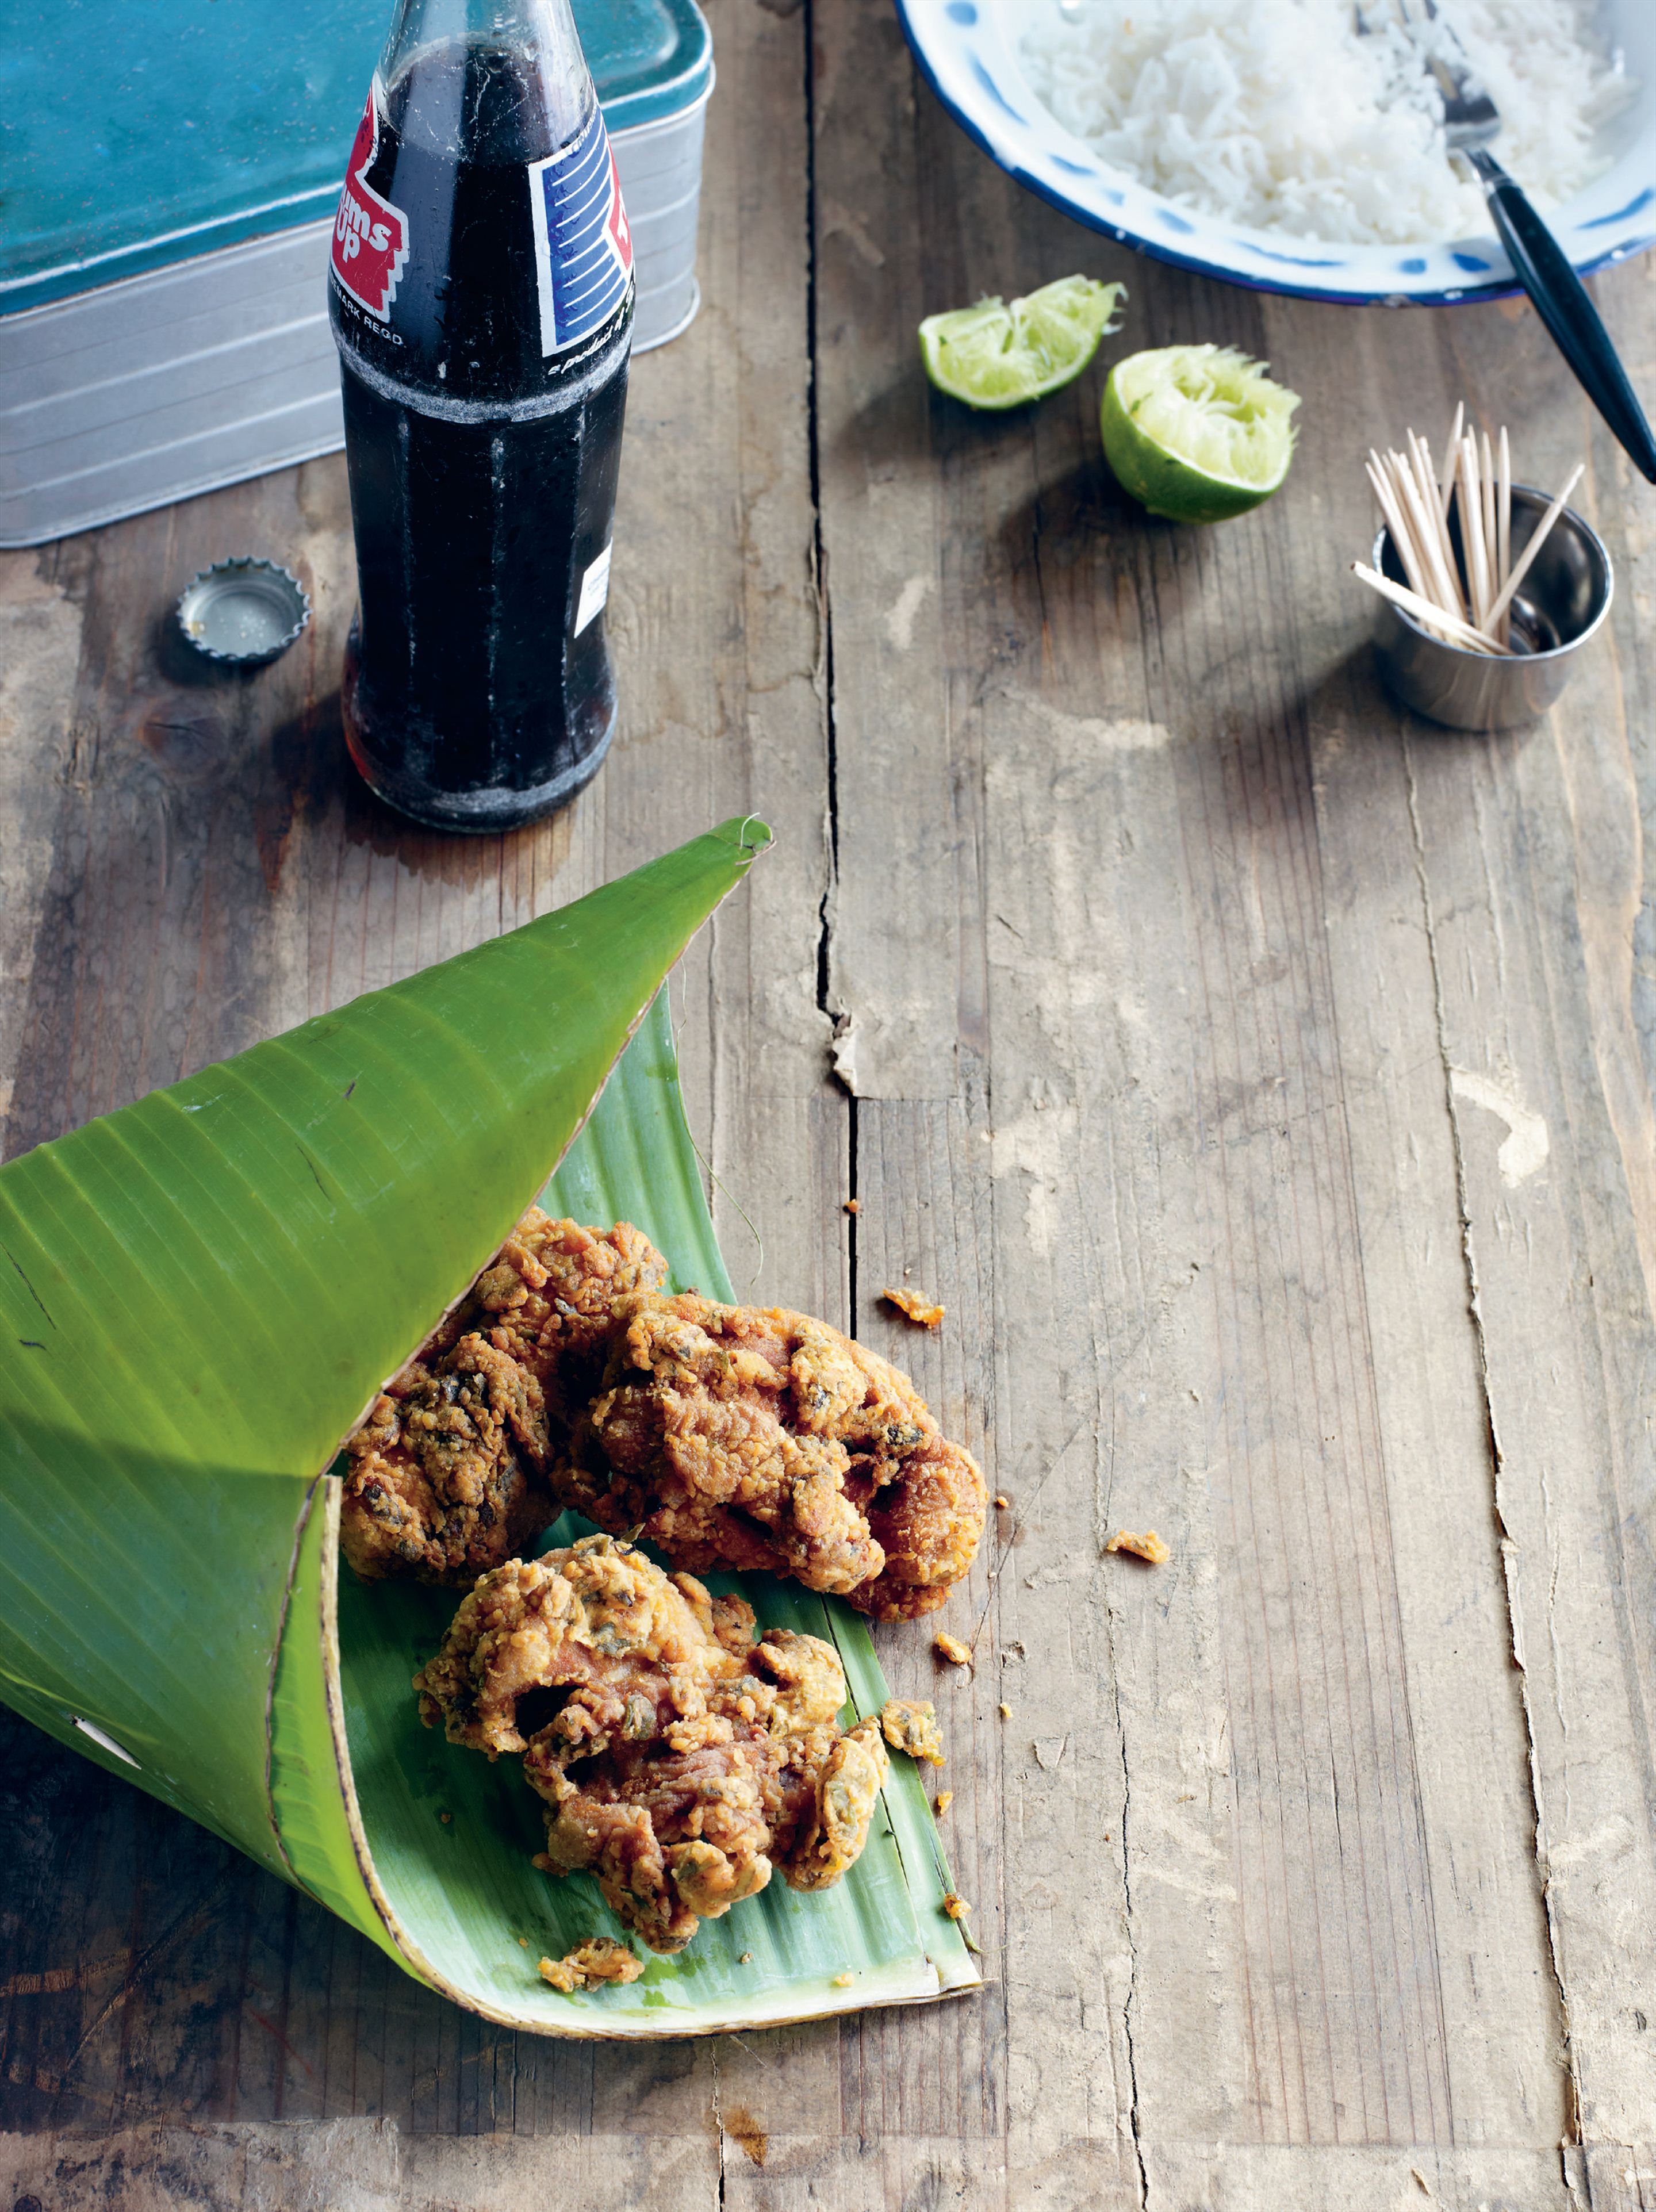 South Indian fried chicken